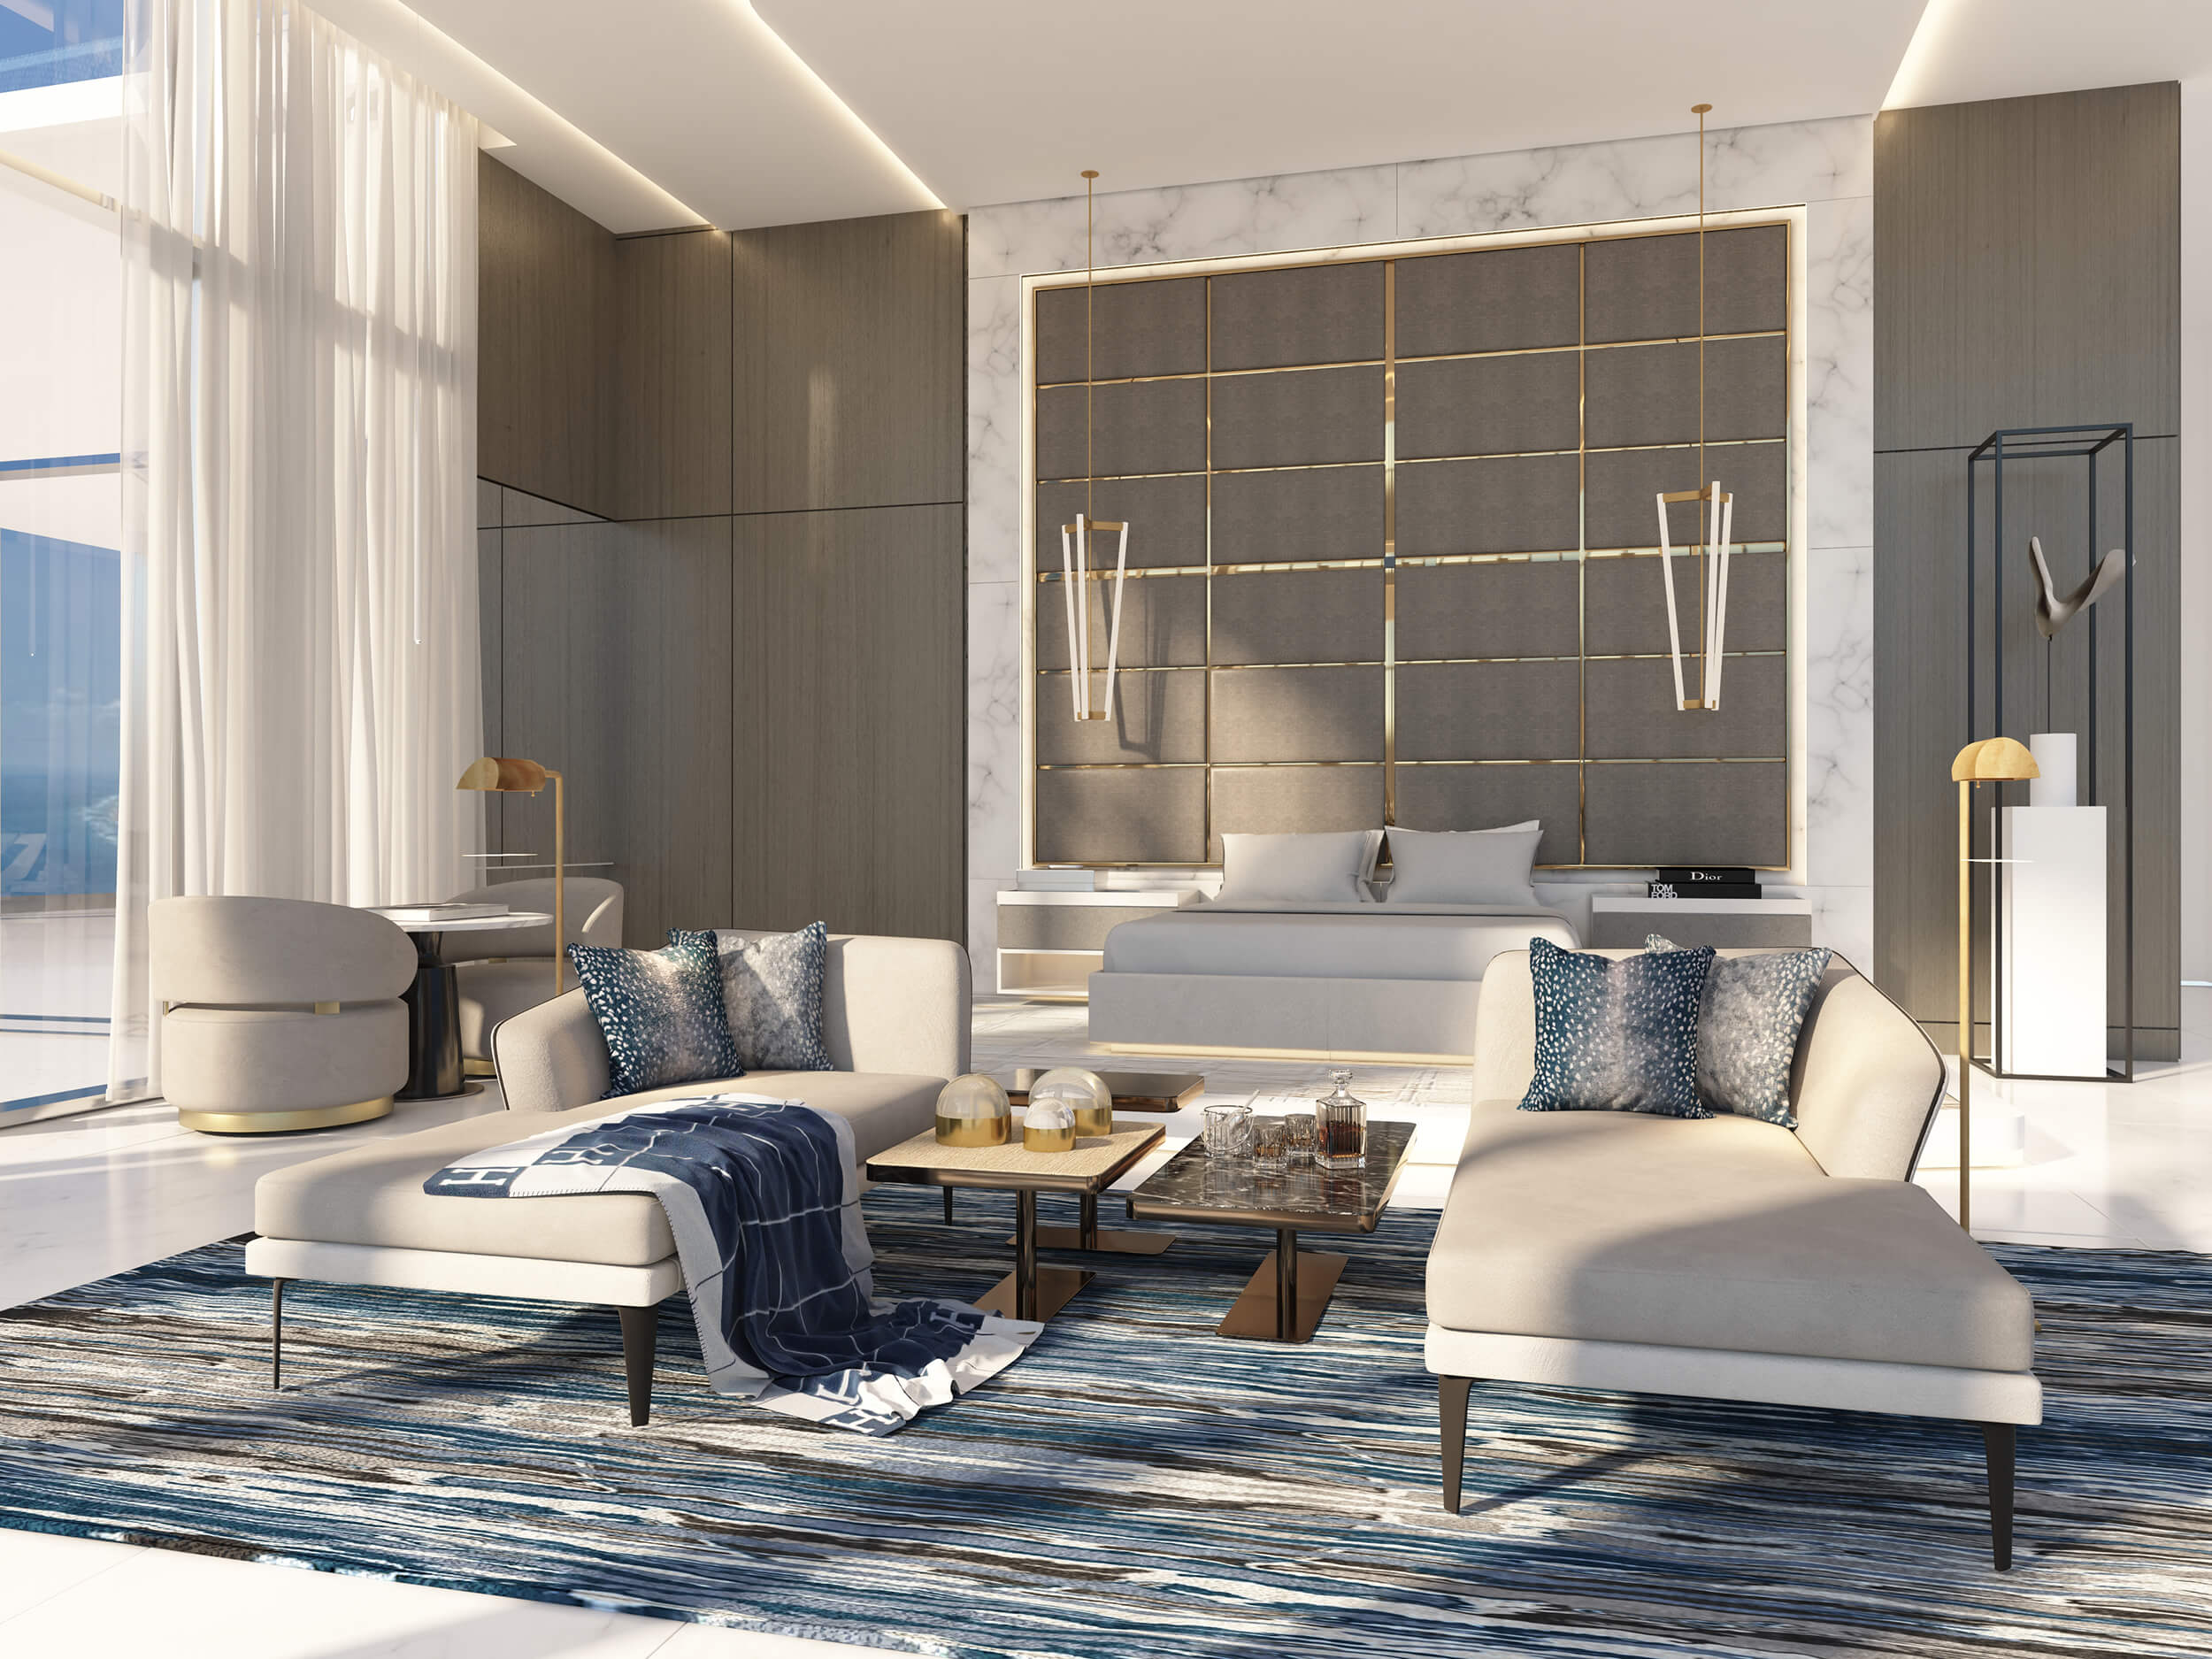 Master bedroom design by Britto Charette for our client at the Ritz Carlton Residences in Sunny Isles Beach